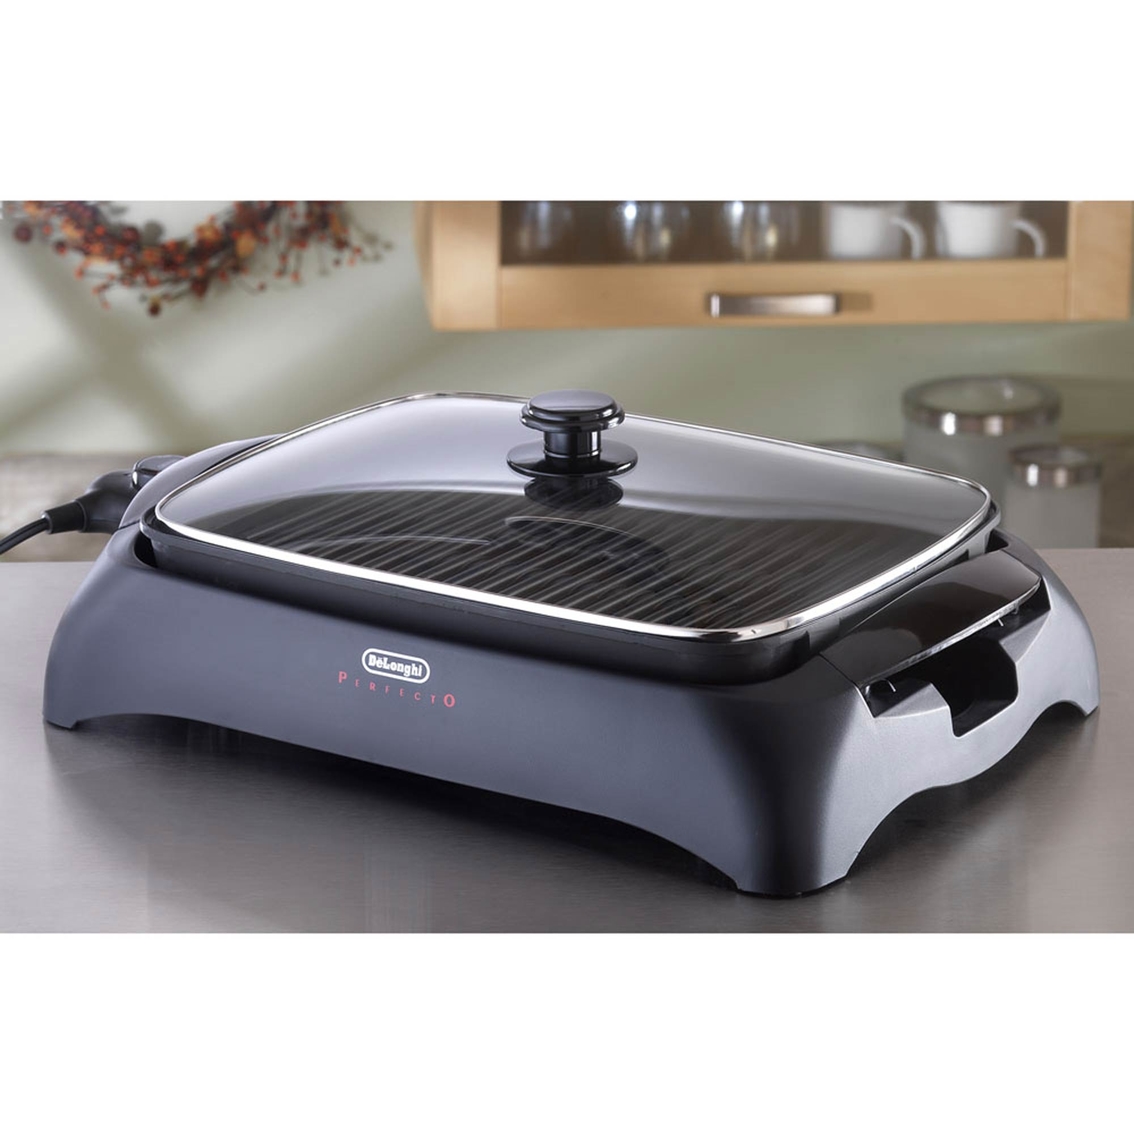 Delonghi Healthy Indoor Grill with Die Cast Aluminum Nonstick Cooking Surface - Image 8 of 8